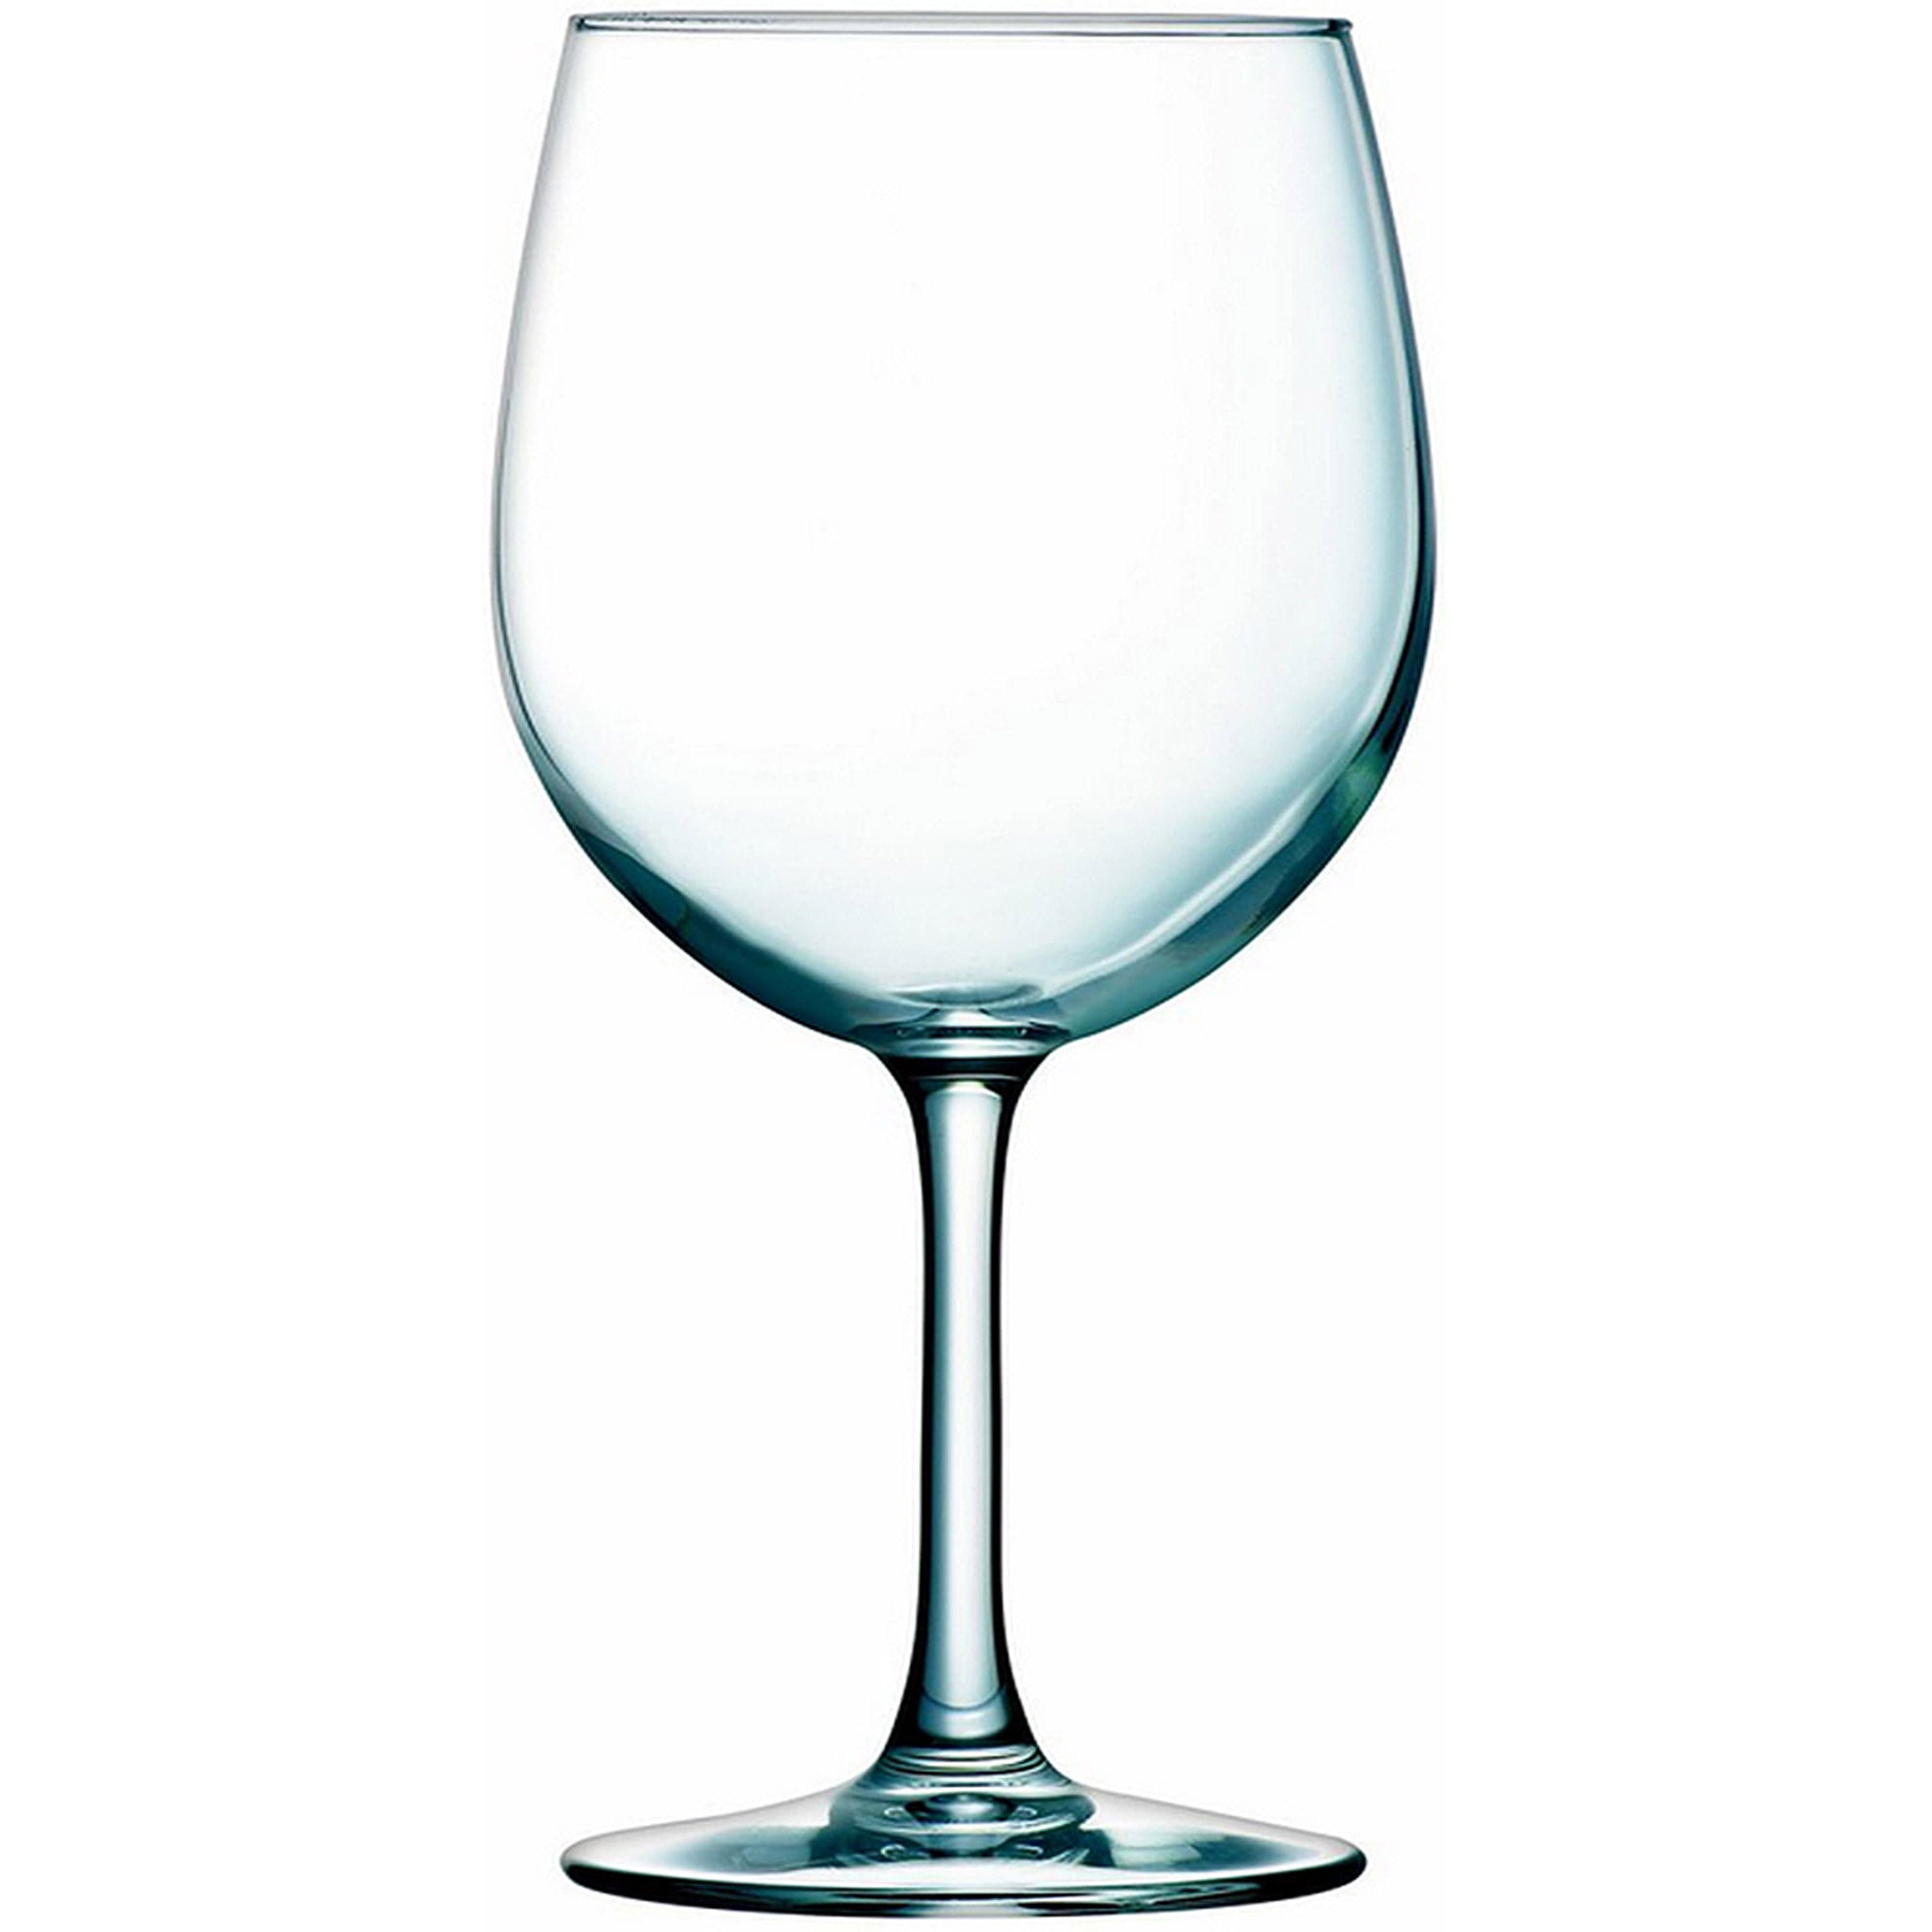 6 Best Wine Glasses in 2022 That'll Elevate Your Favorite Vino